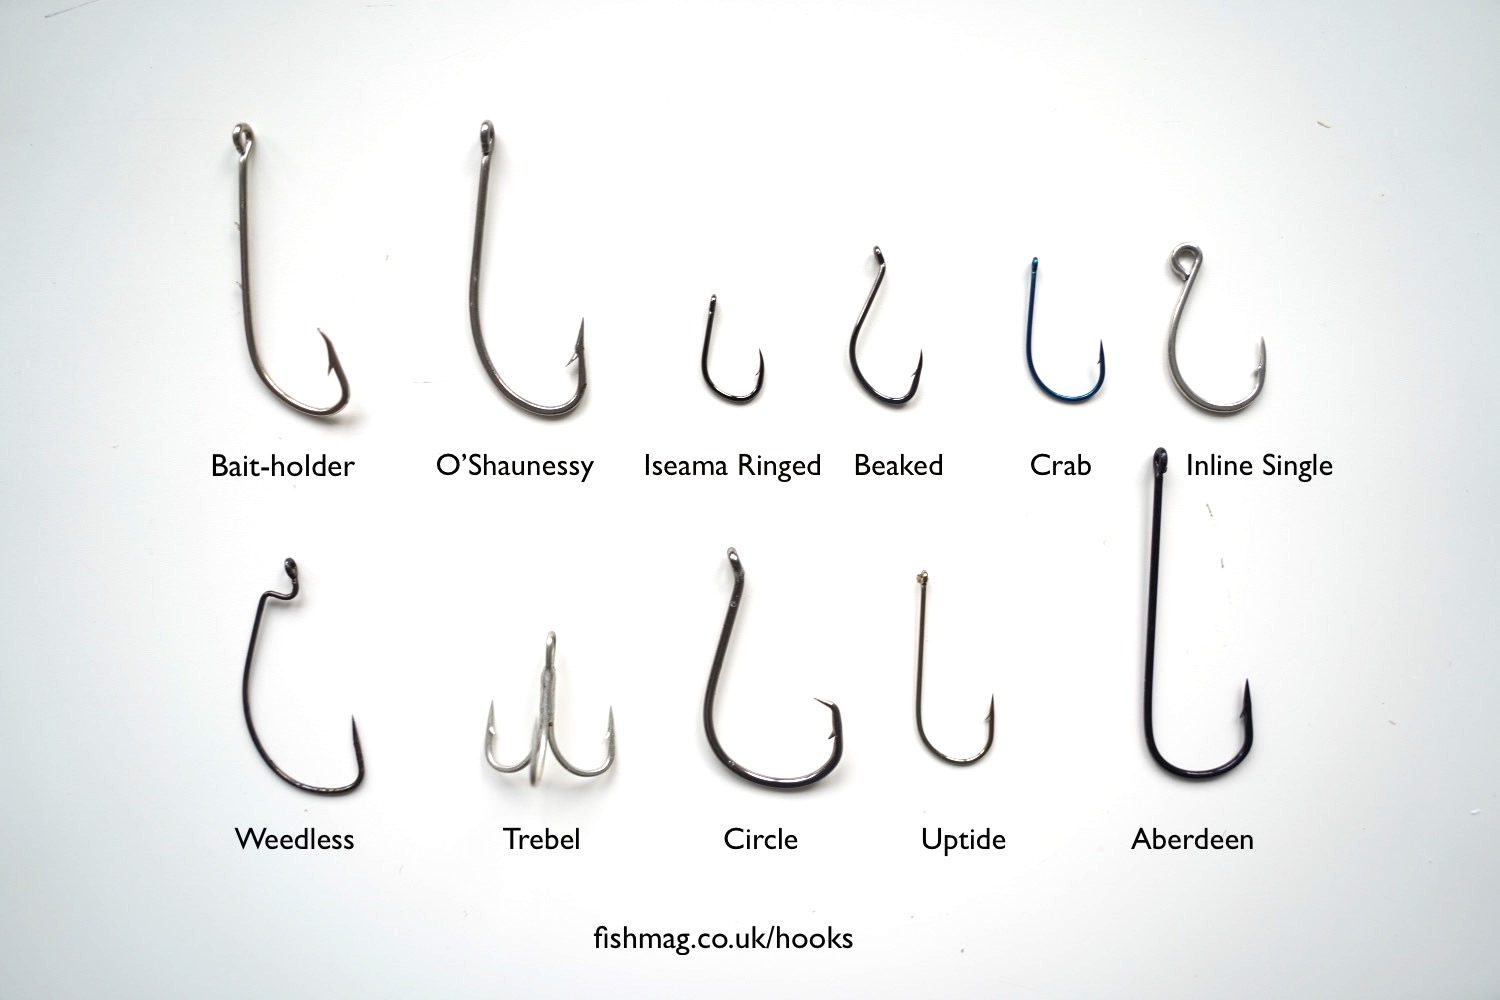 Dogfish & Bull Huss Fishing UK | The Game Changing Guide